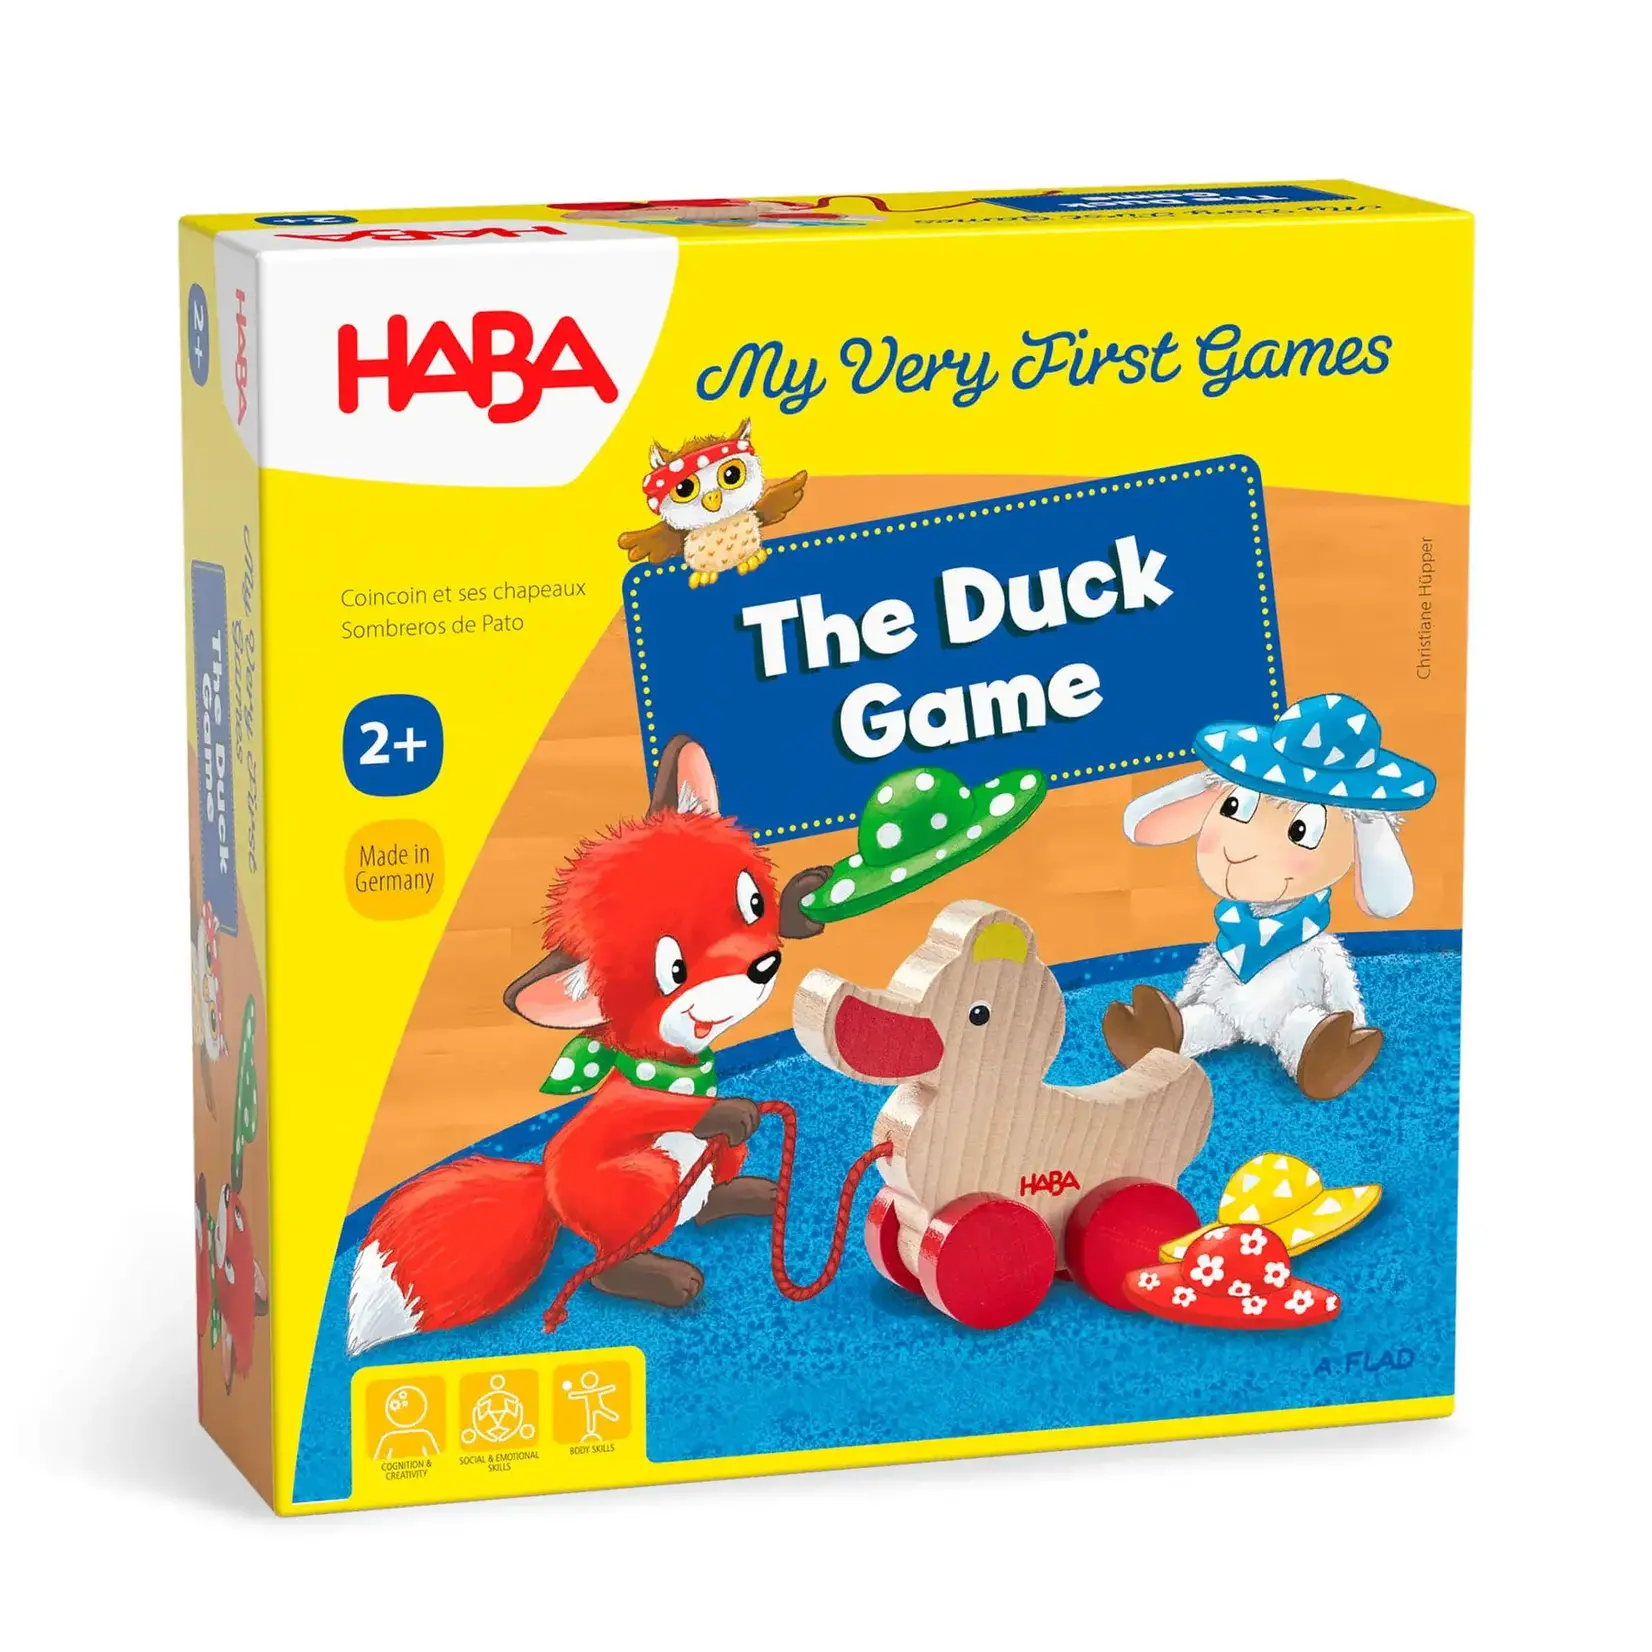 HABA USA My Very First Games The Duck Game